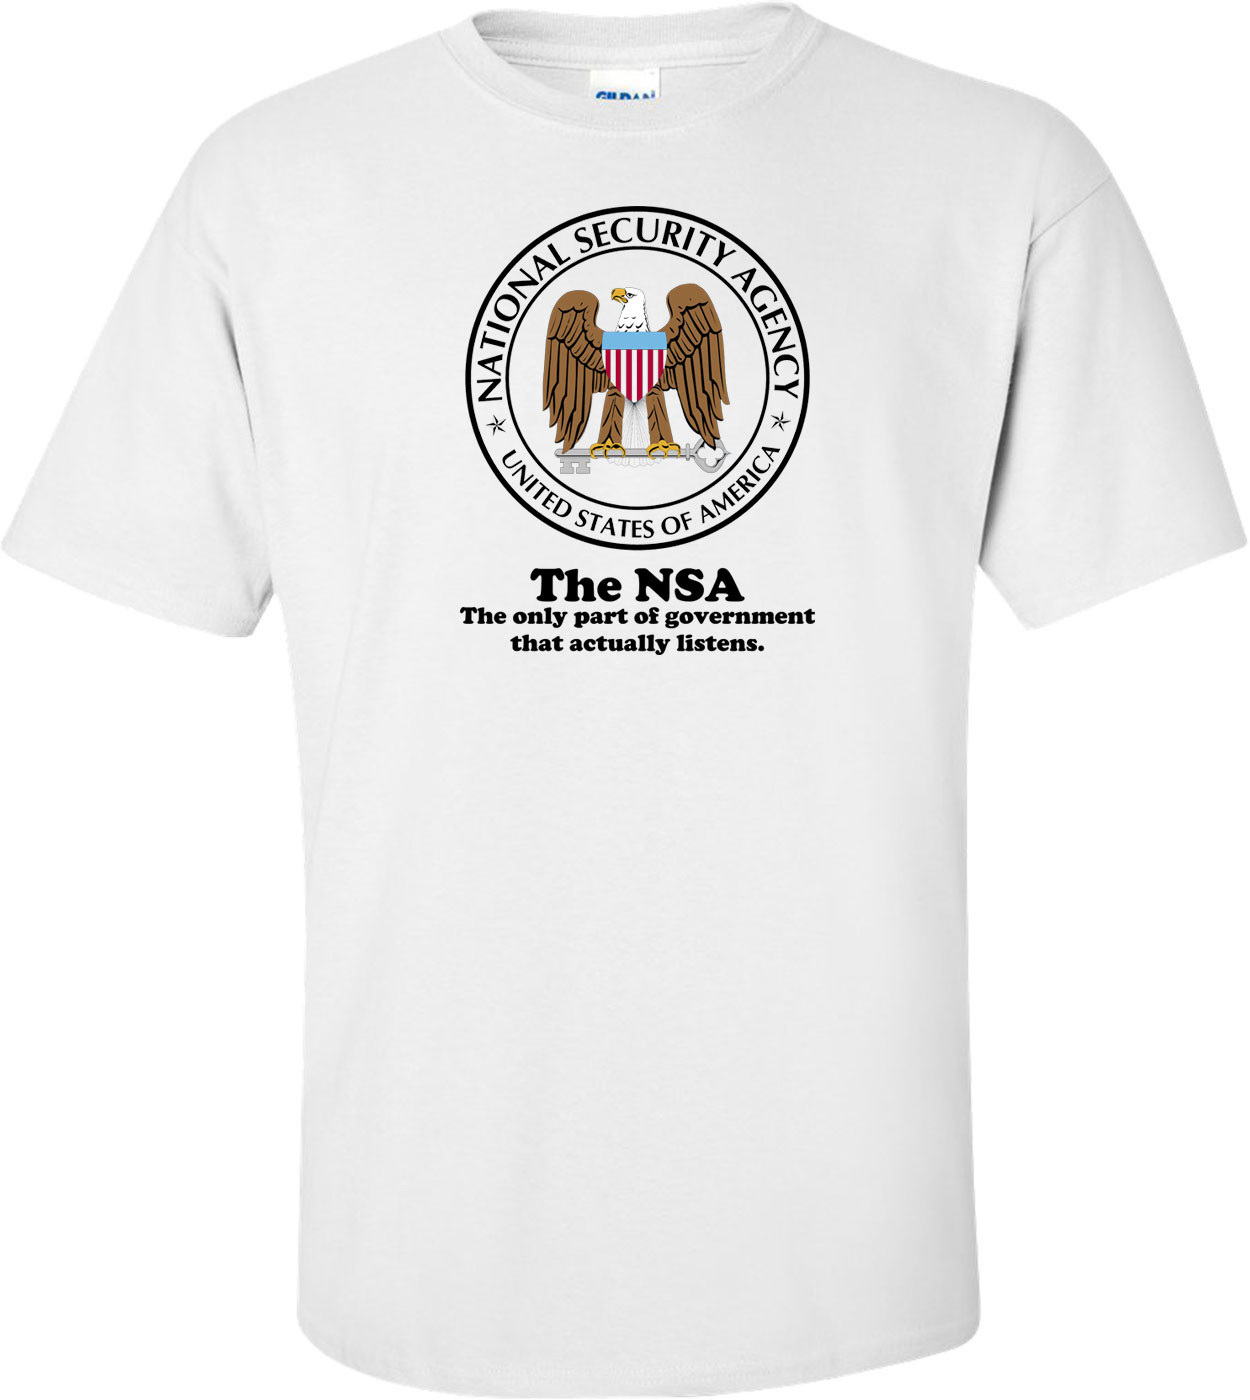 The Nsa The Government Is Listening! Funny Shirt